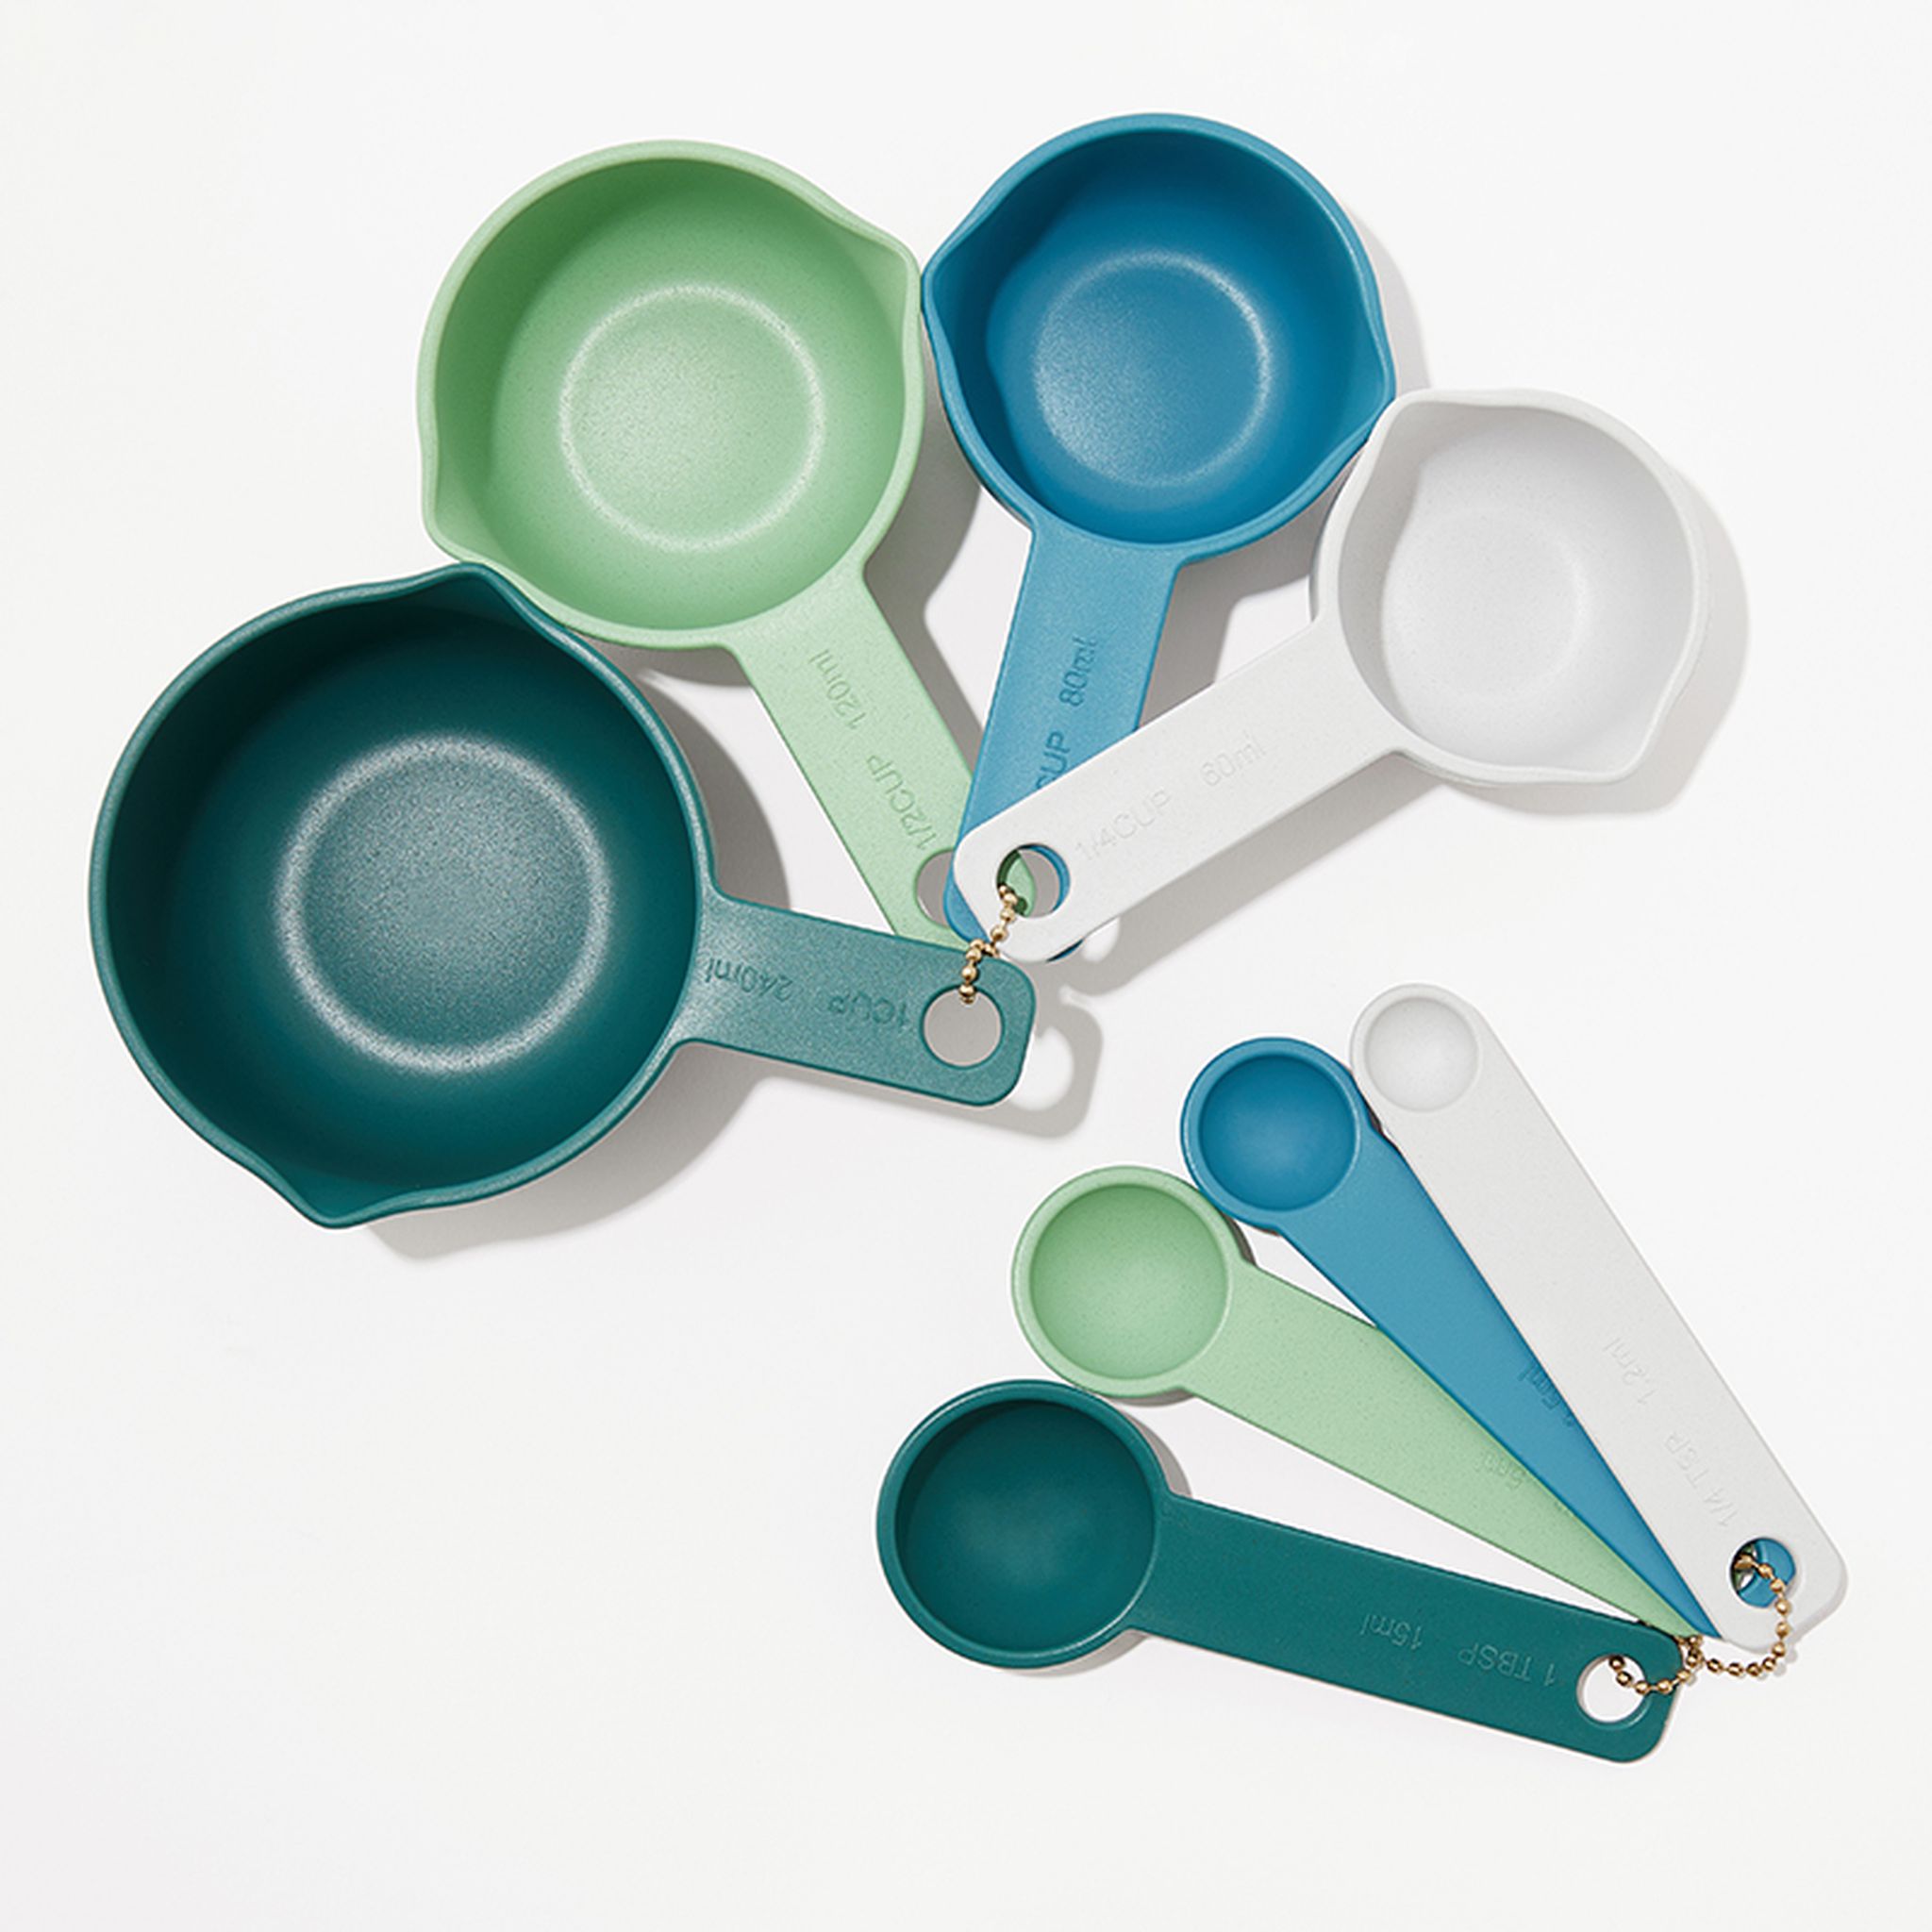 Food52 Bamboo Measuring Cups & Spoons